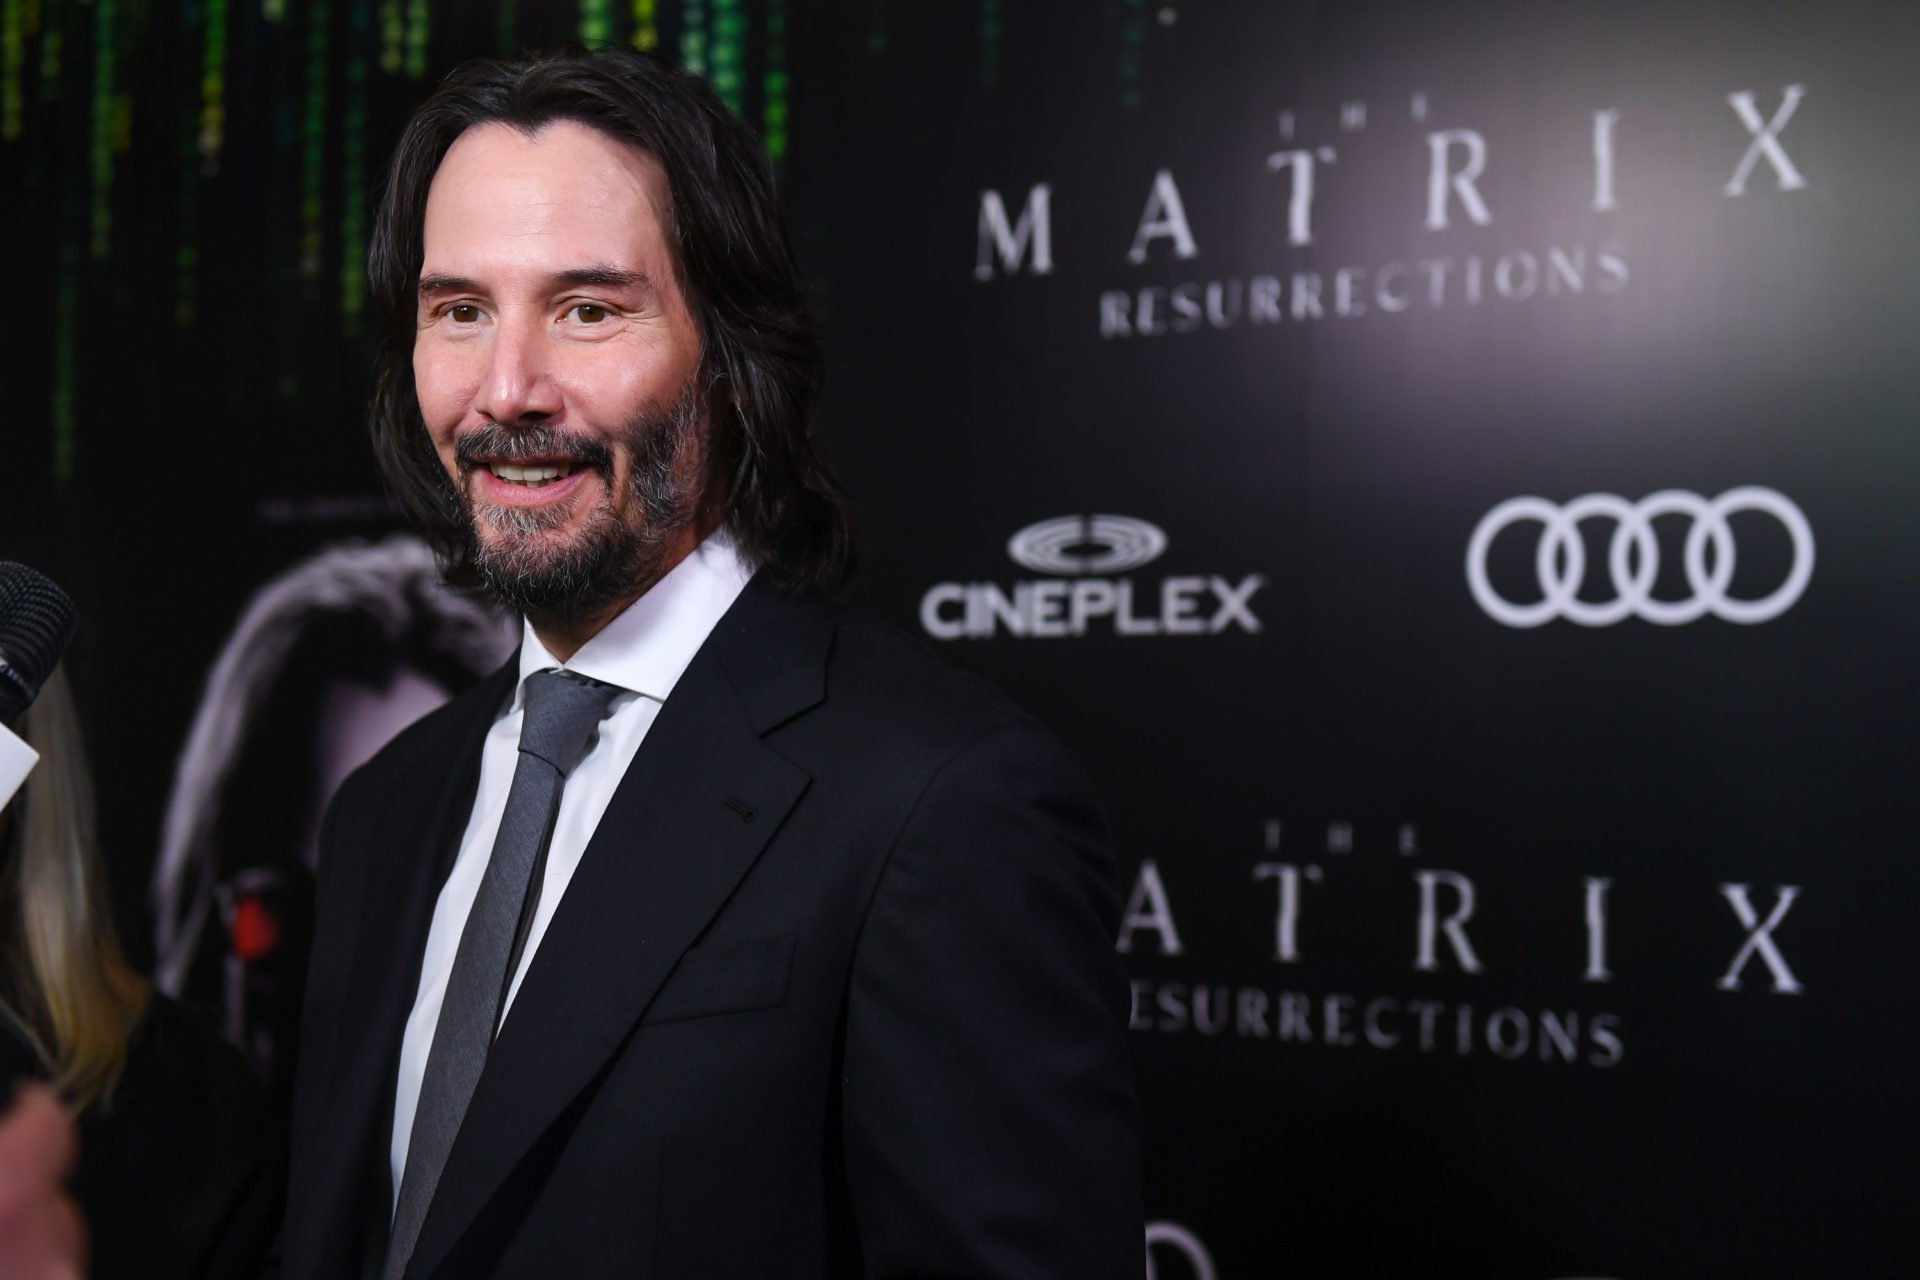 TORONTO, ON - DECEMBER 16: Actor Keanu Reeves Attends Canada Premiere of "Matrix Recovery" held at Cineplex